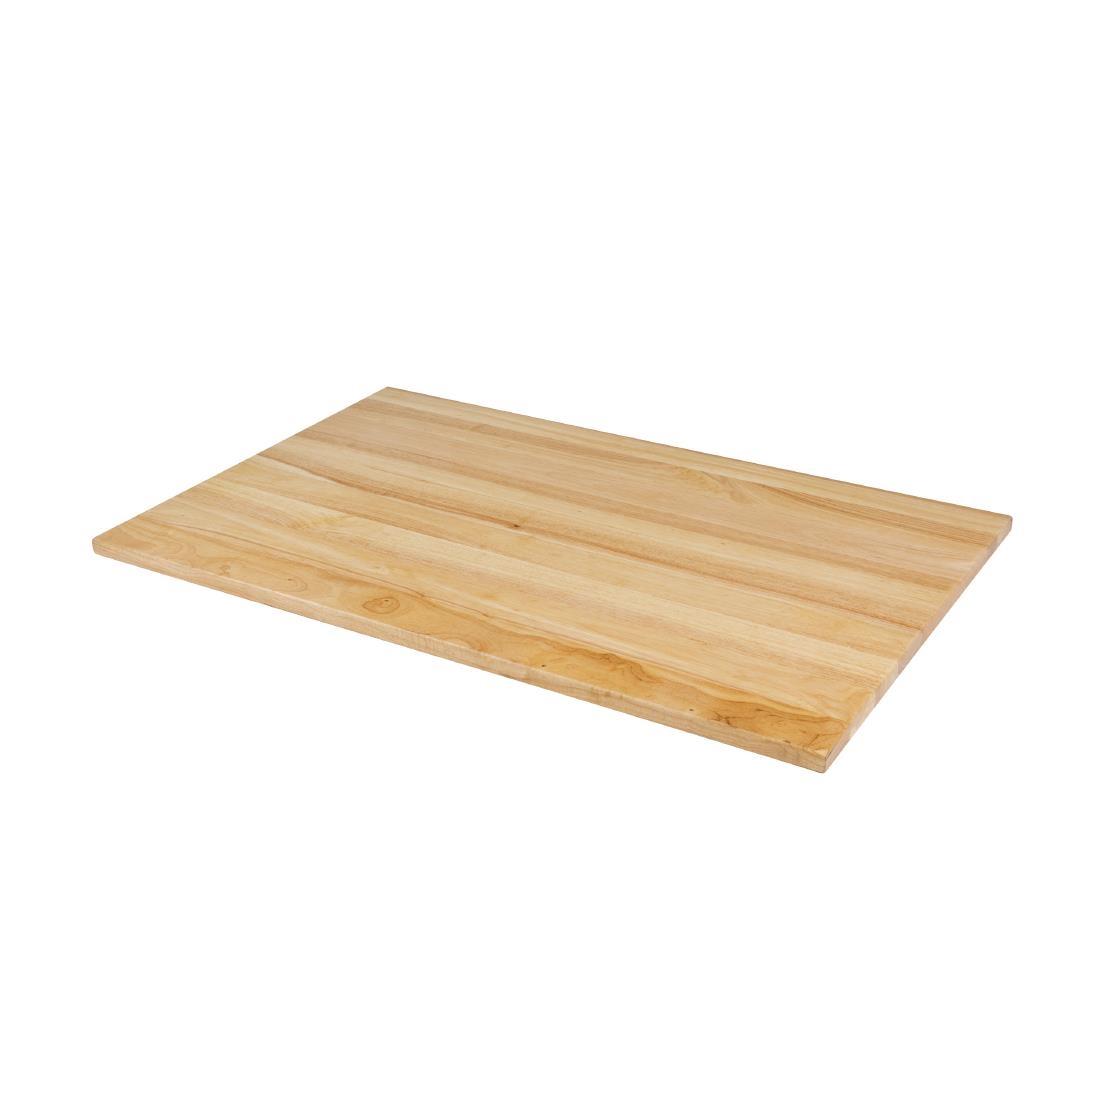 Bolero Pre-drilled Rectangular Table Top Natural 1100 x 700mm - DY727  - 2